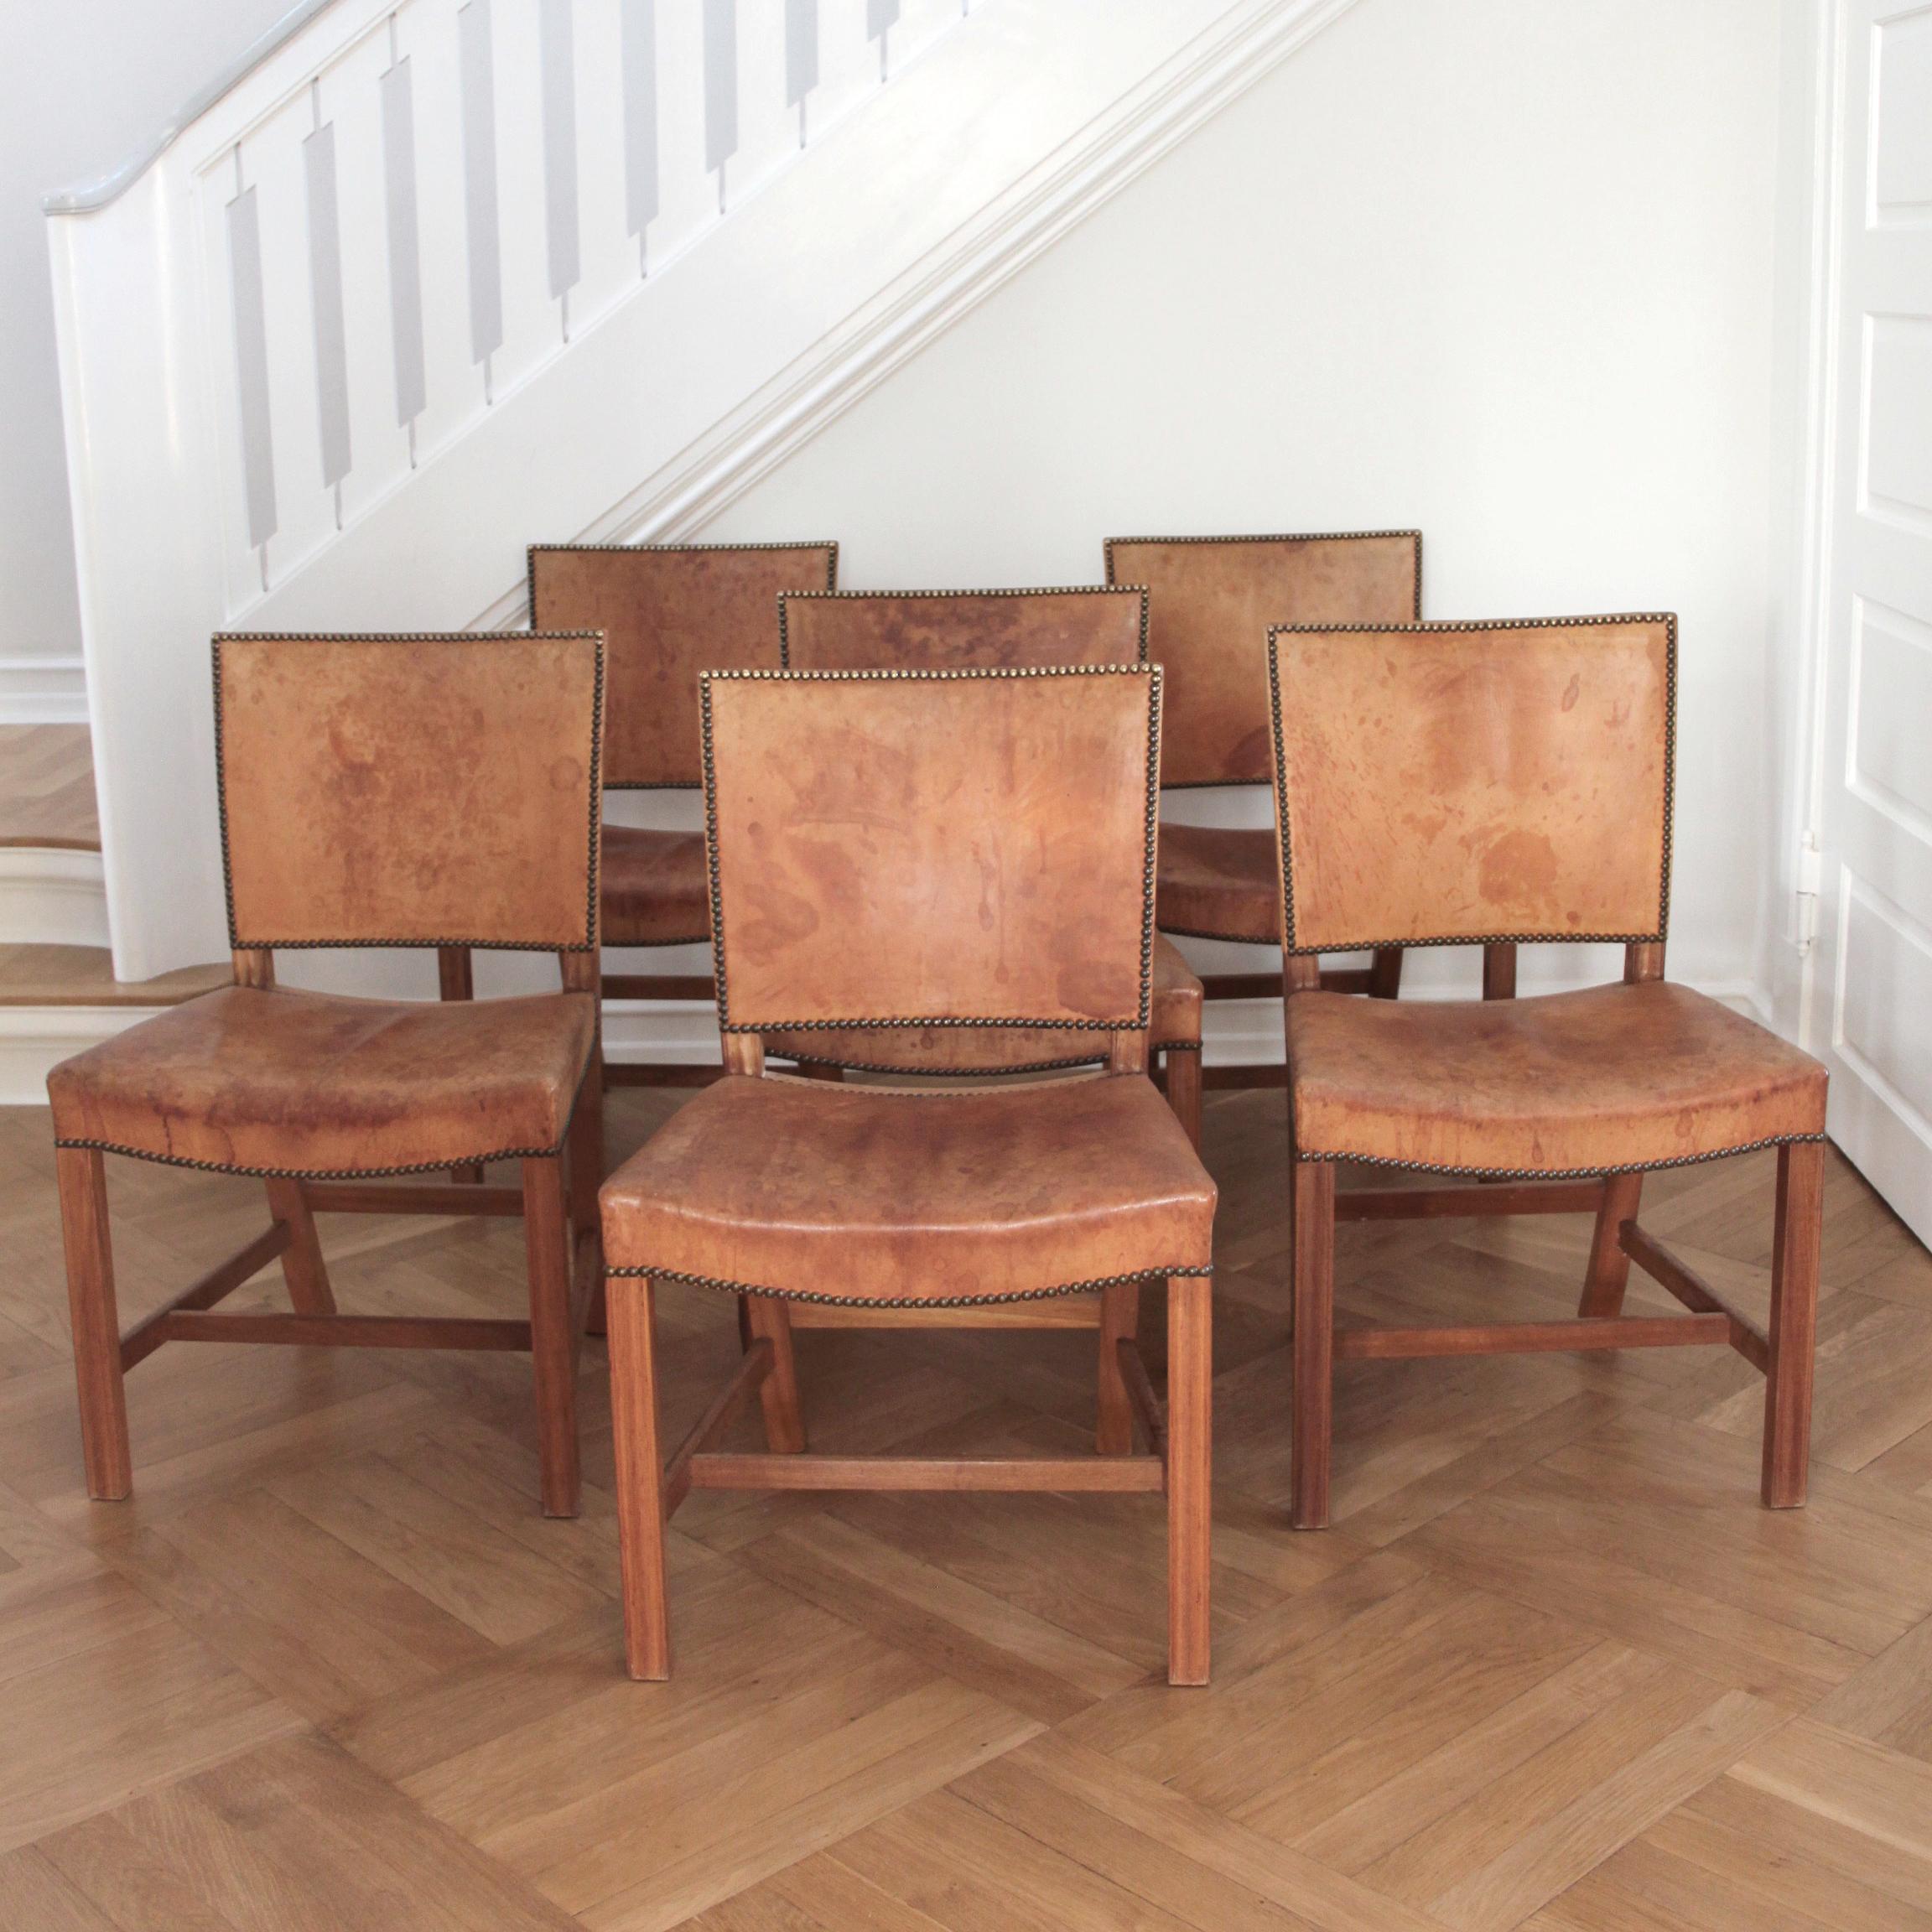 Six Kaare Klint Red Chairs, Mahogany and Original Niger Leather 1